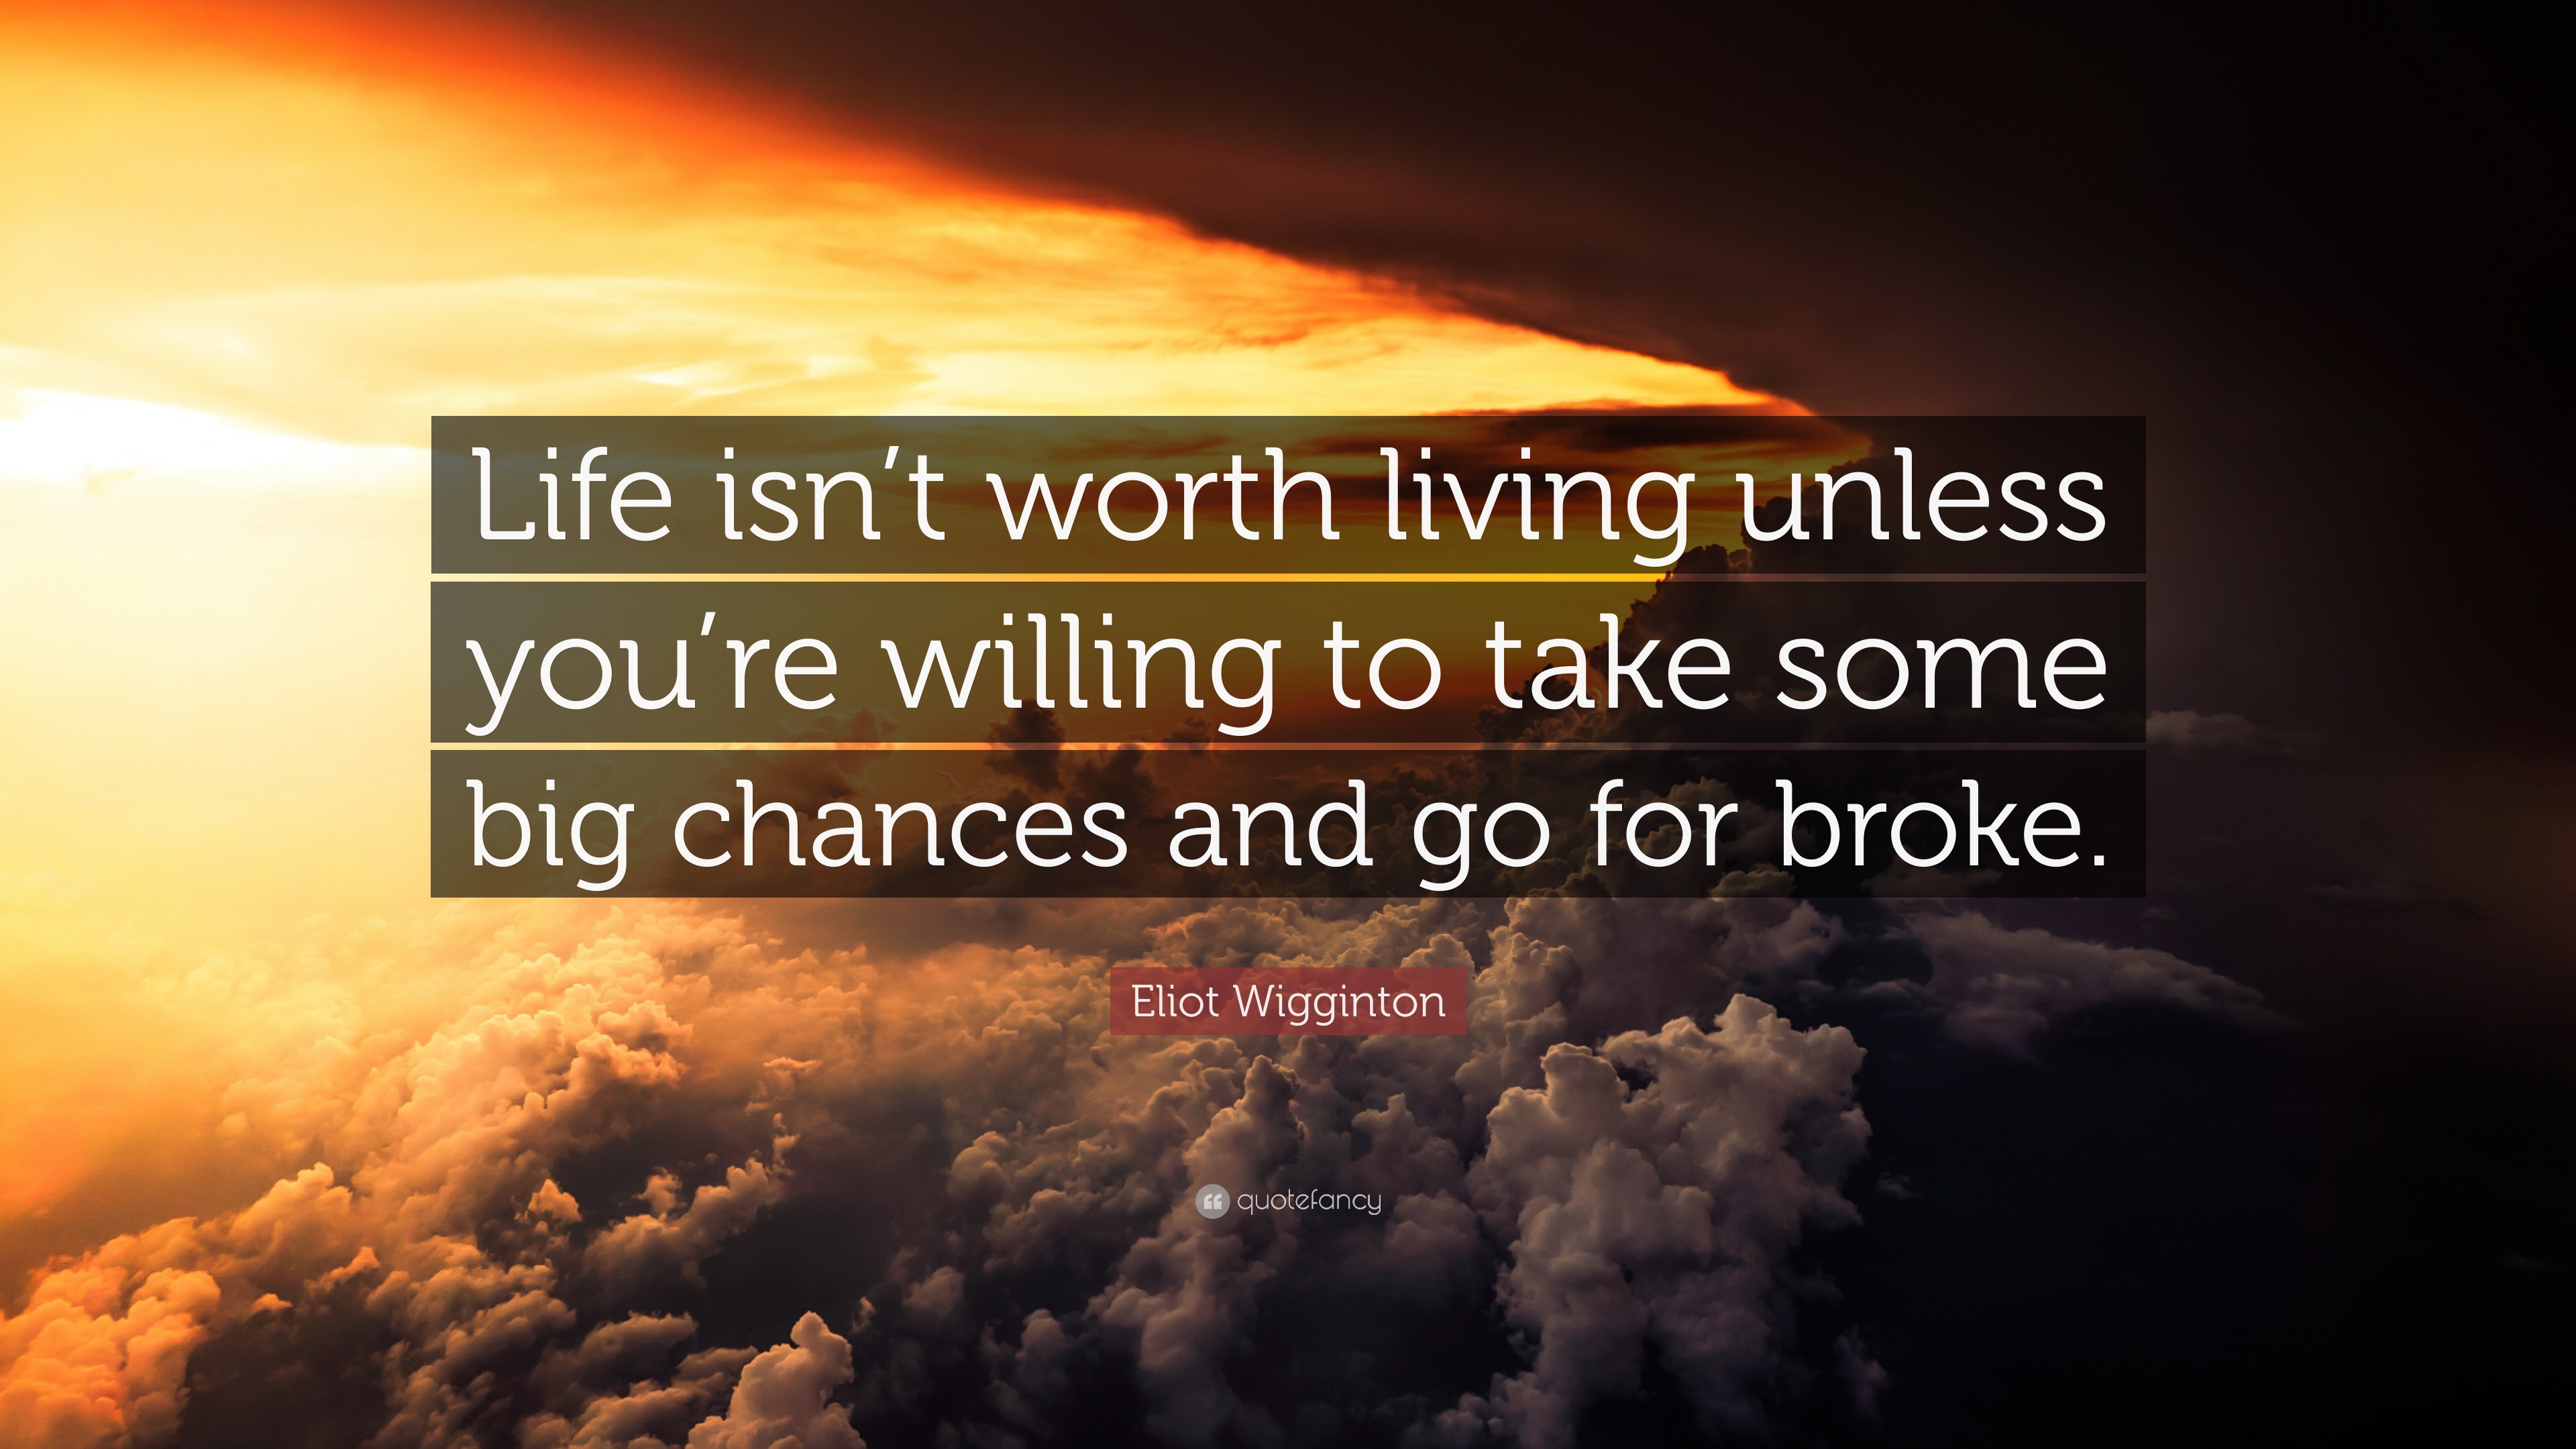 Eliot Wigginton Quote: “Life isn’t worth living unless you’re willing ...